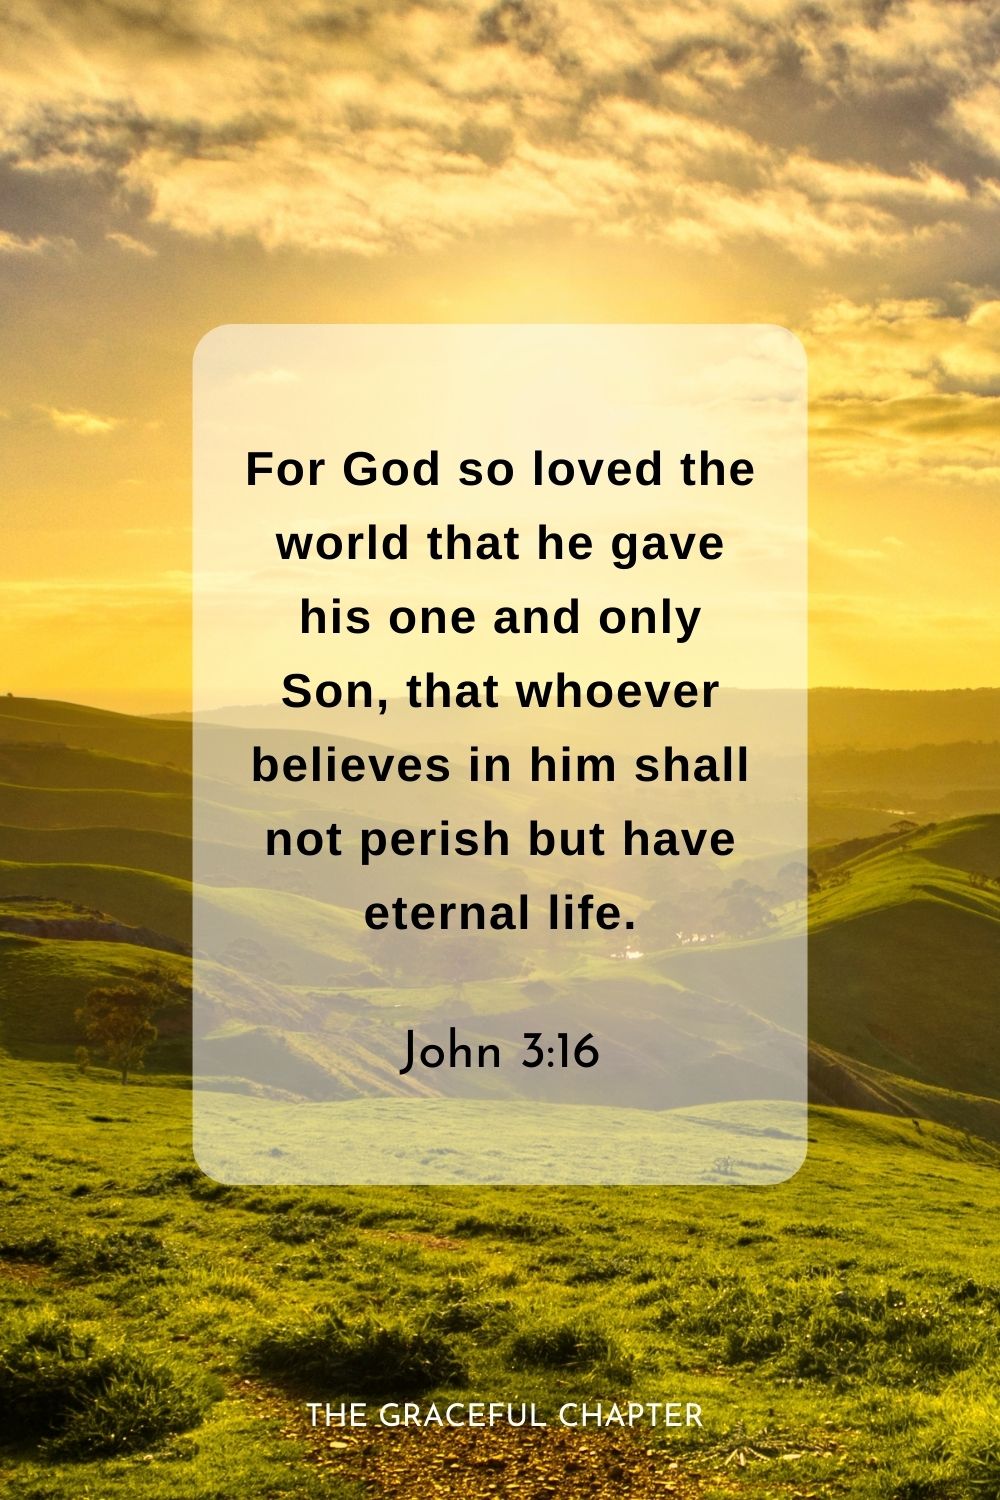 For God so loved the world that he gave his one and only Son, that whoever believes in him shall not perish but have eternal life.